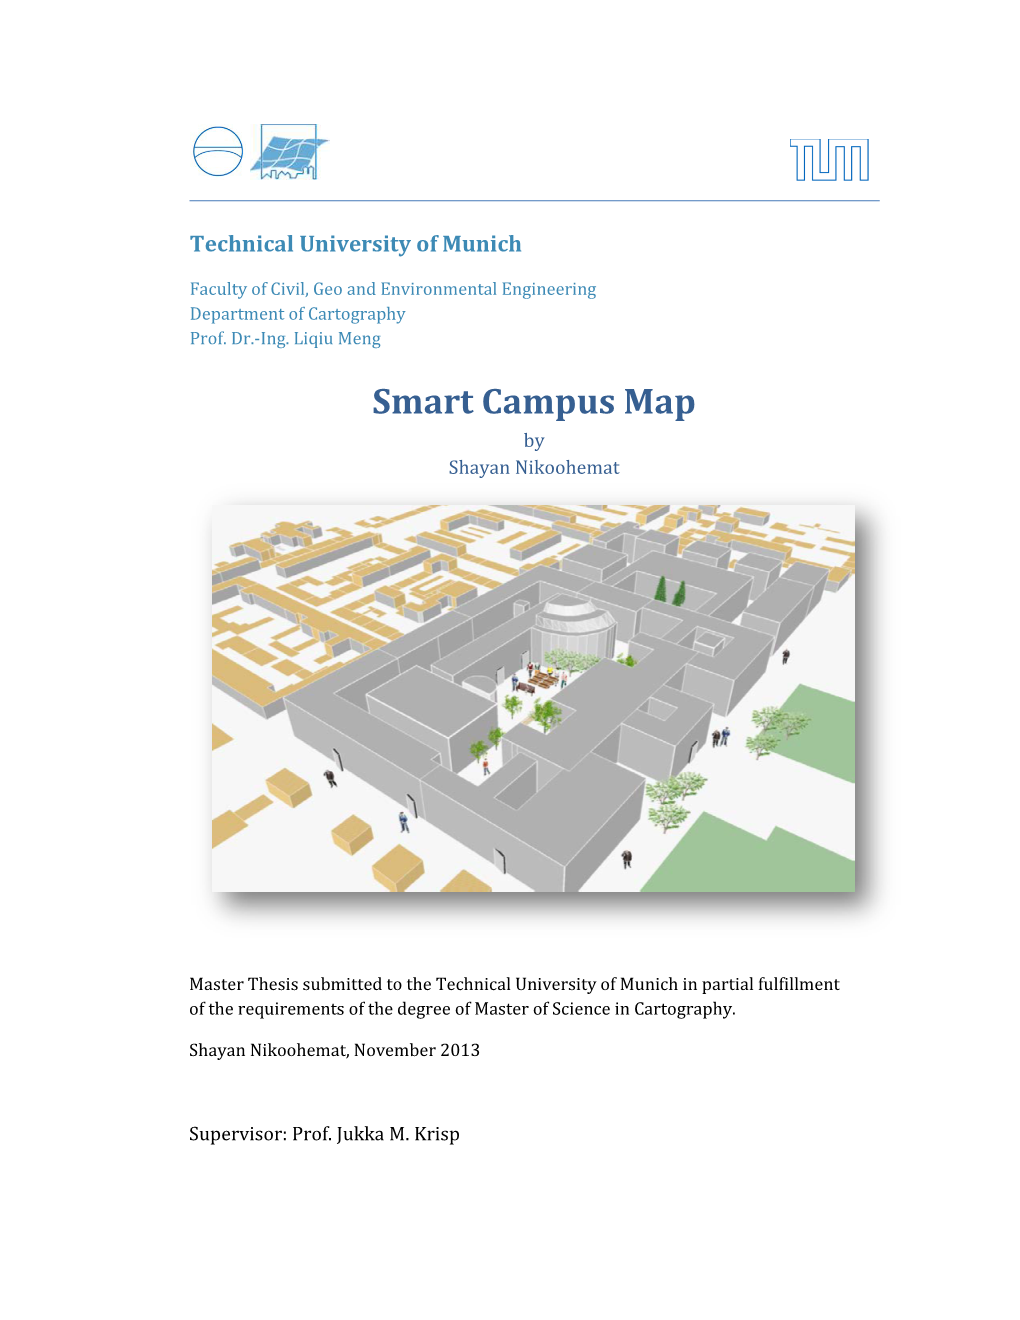 Smart Campus Map by Shayan Nikoohemat